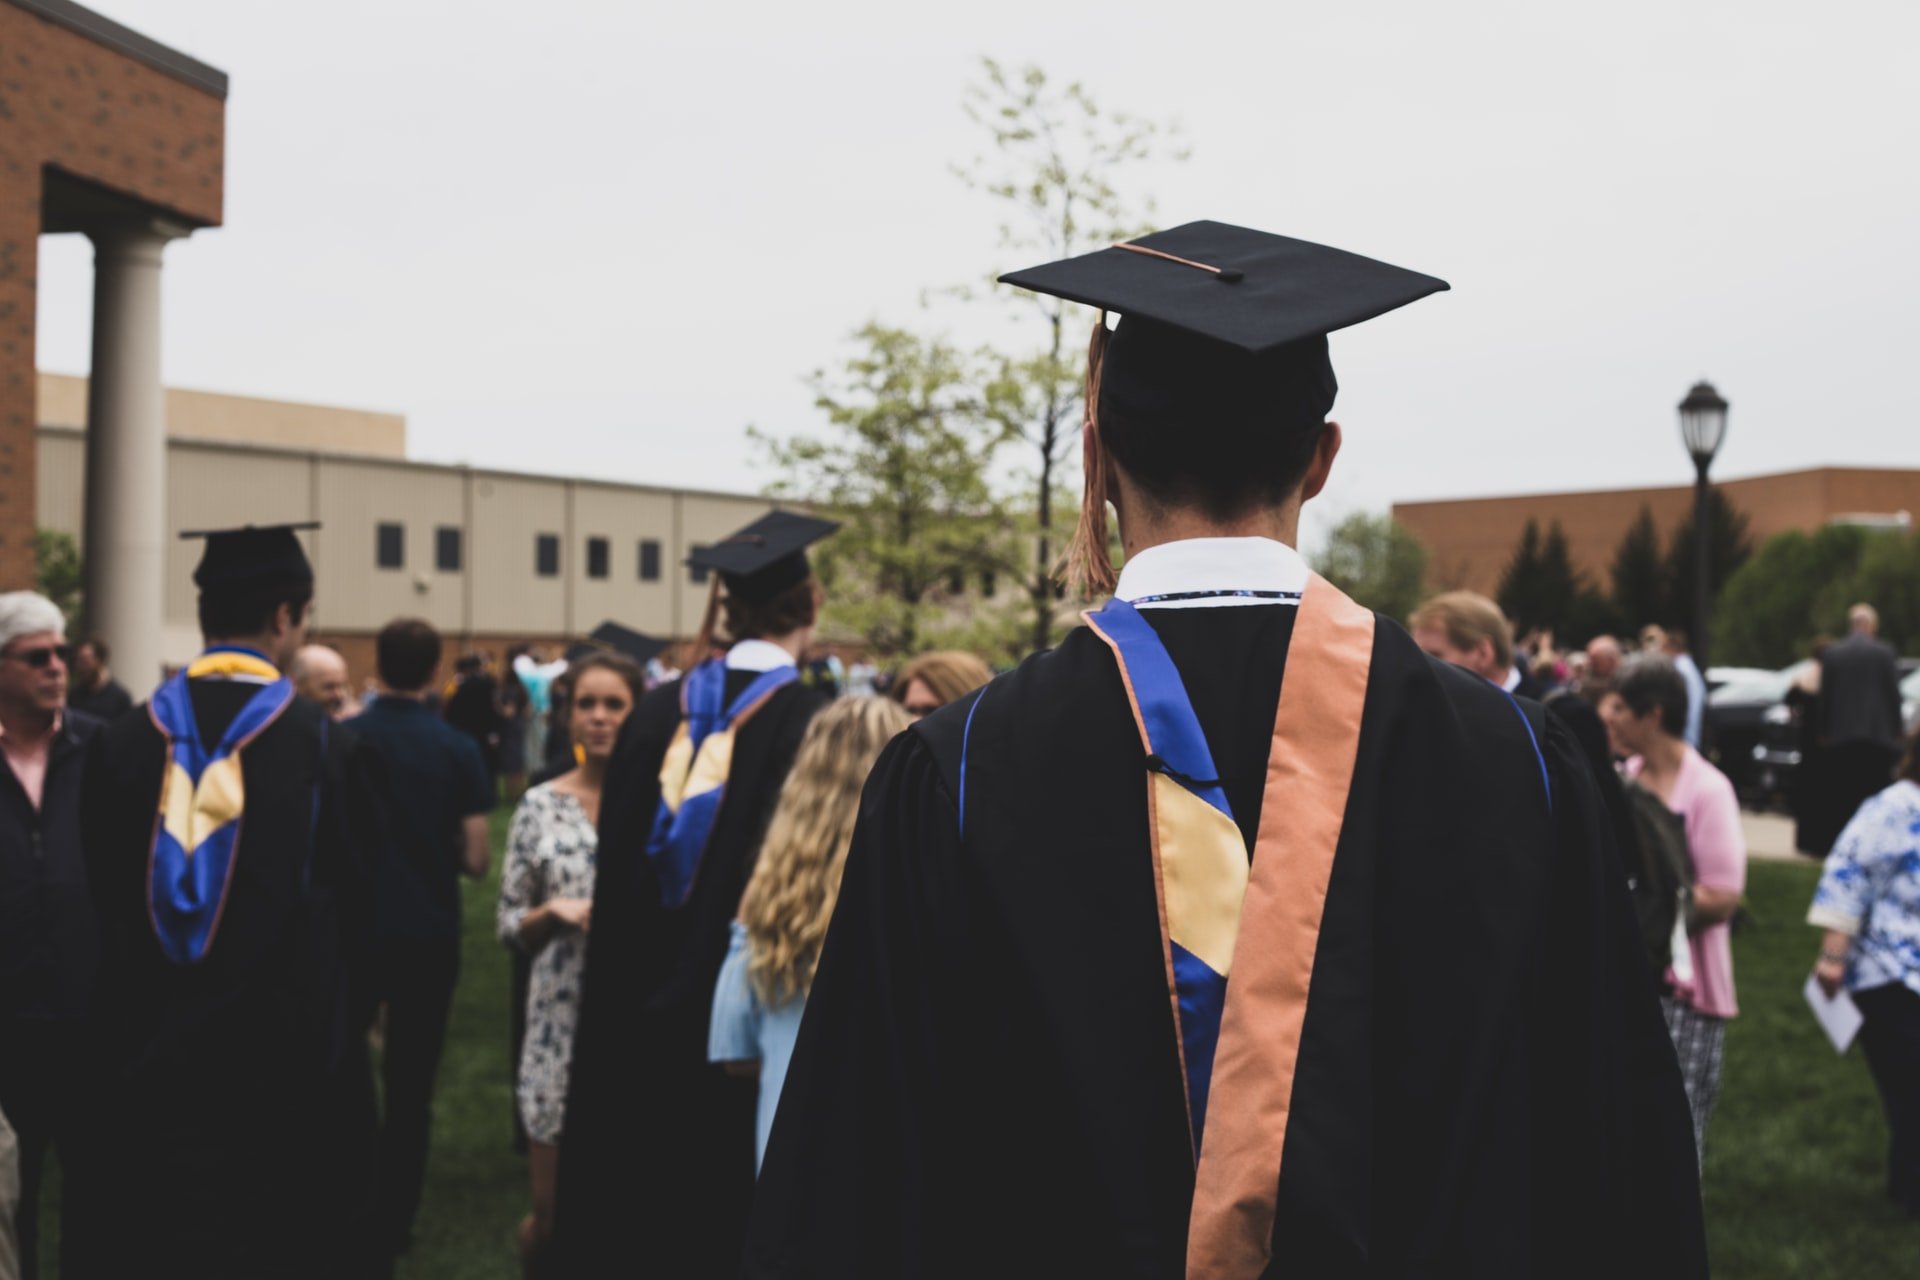 OP planned on supporting underprivileged children who wanted to go to college | Source: Unsplash